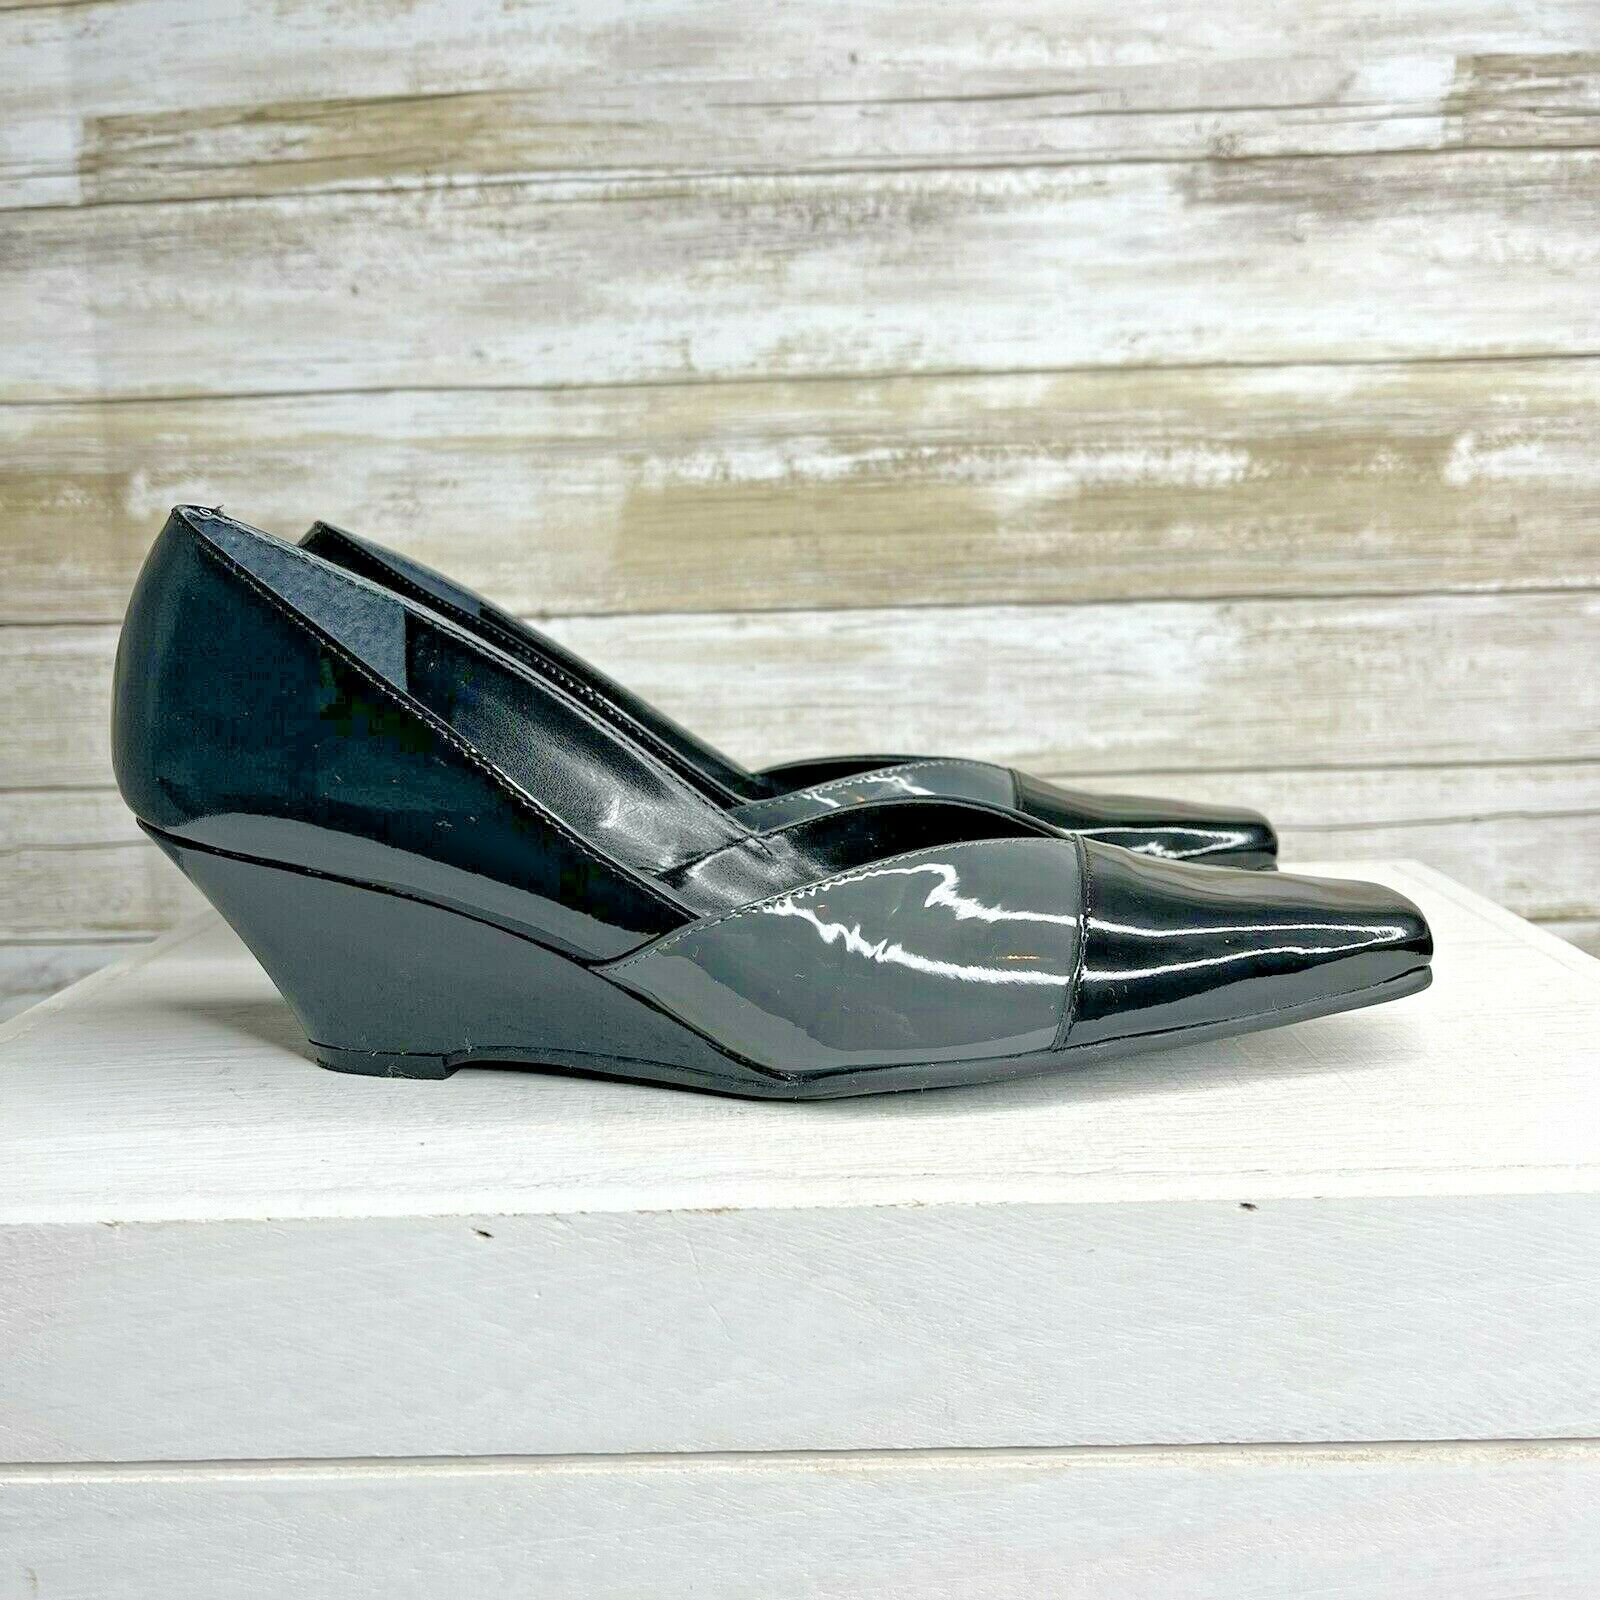 AEROSOLES Womens Black And Gray Patent Leather Wedge Shoes Pumps SIZE 7.5 B